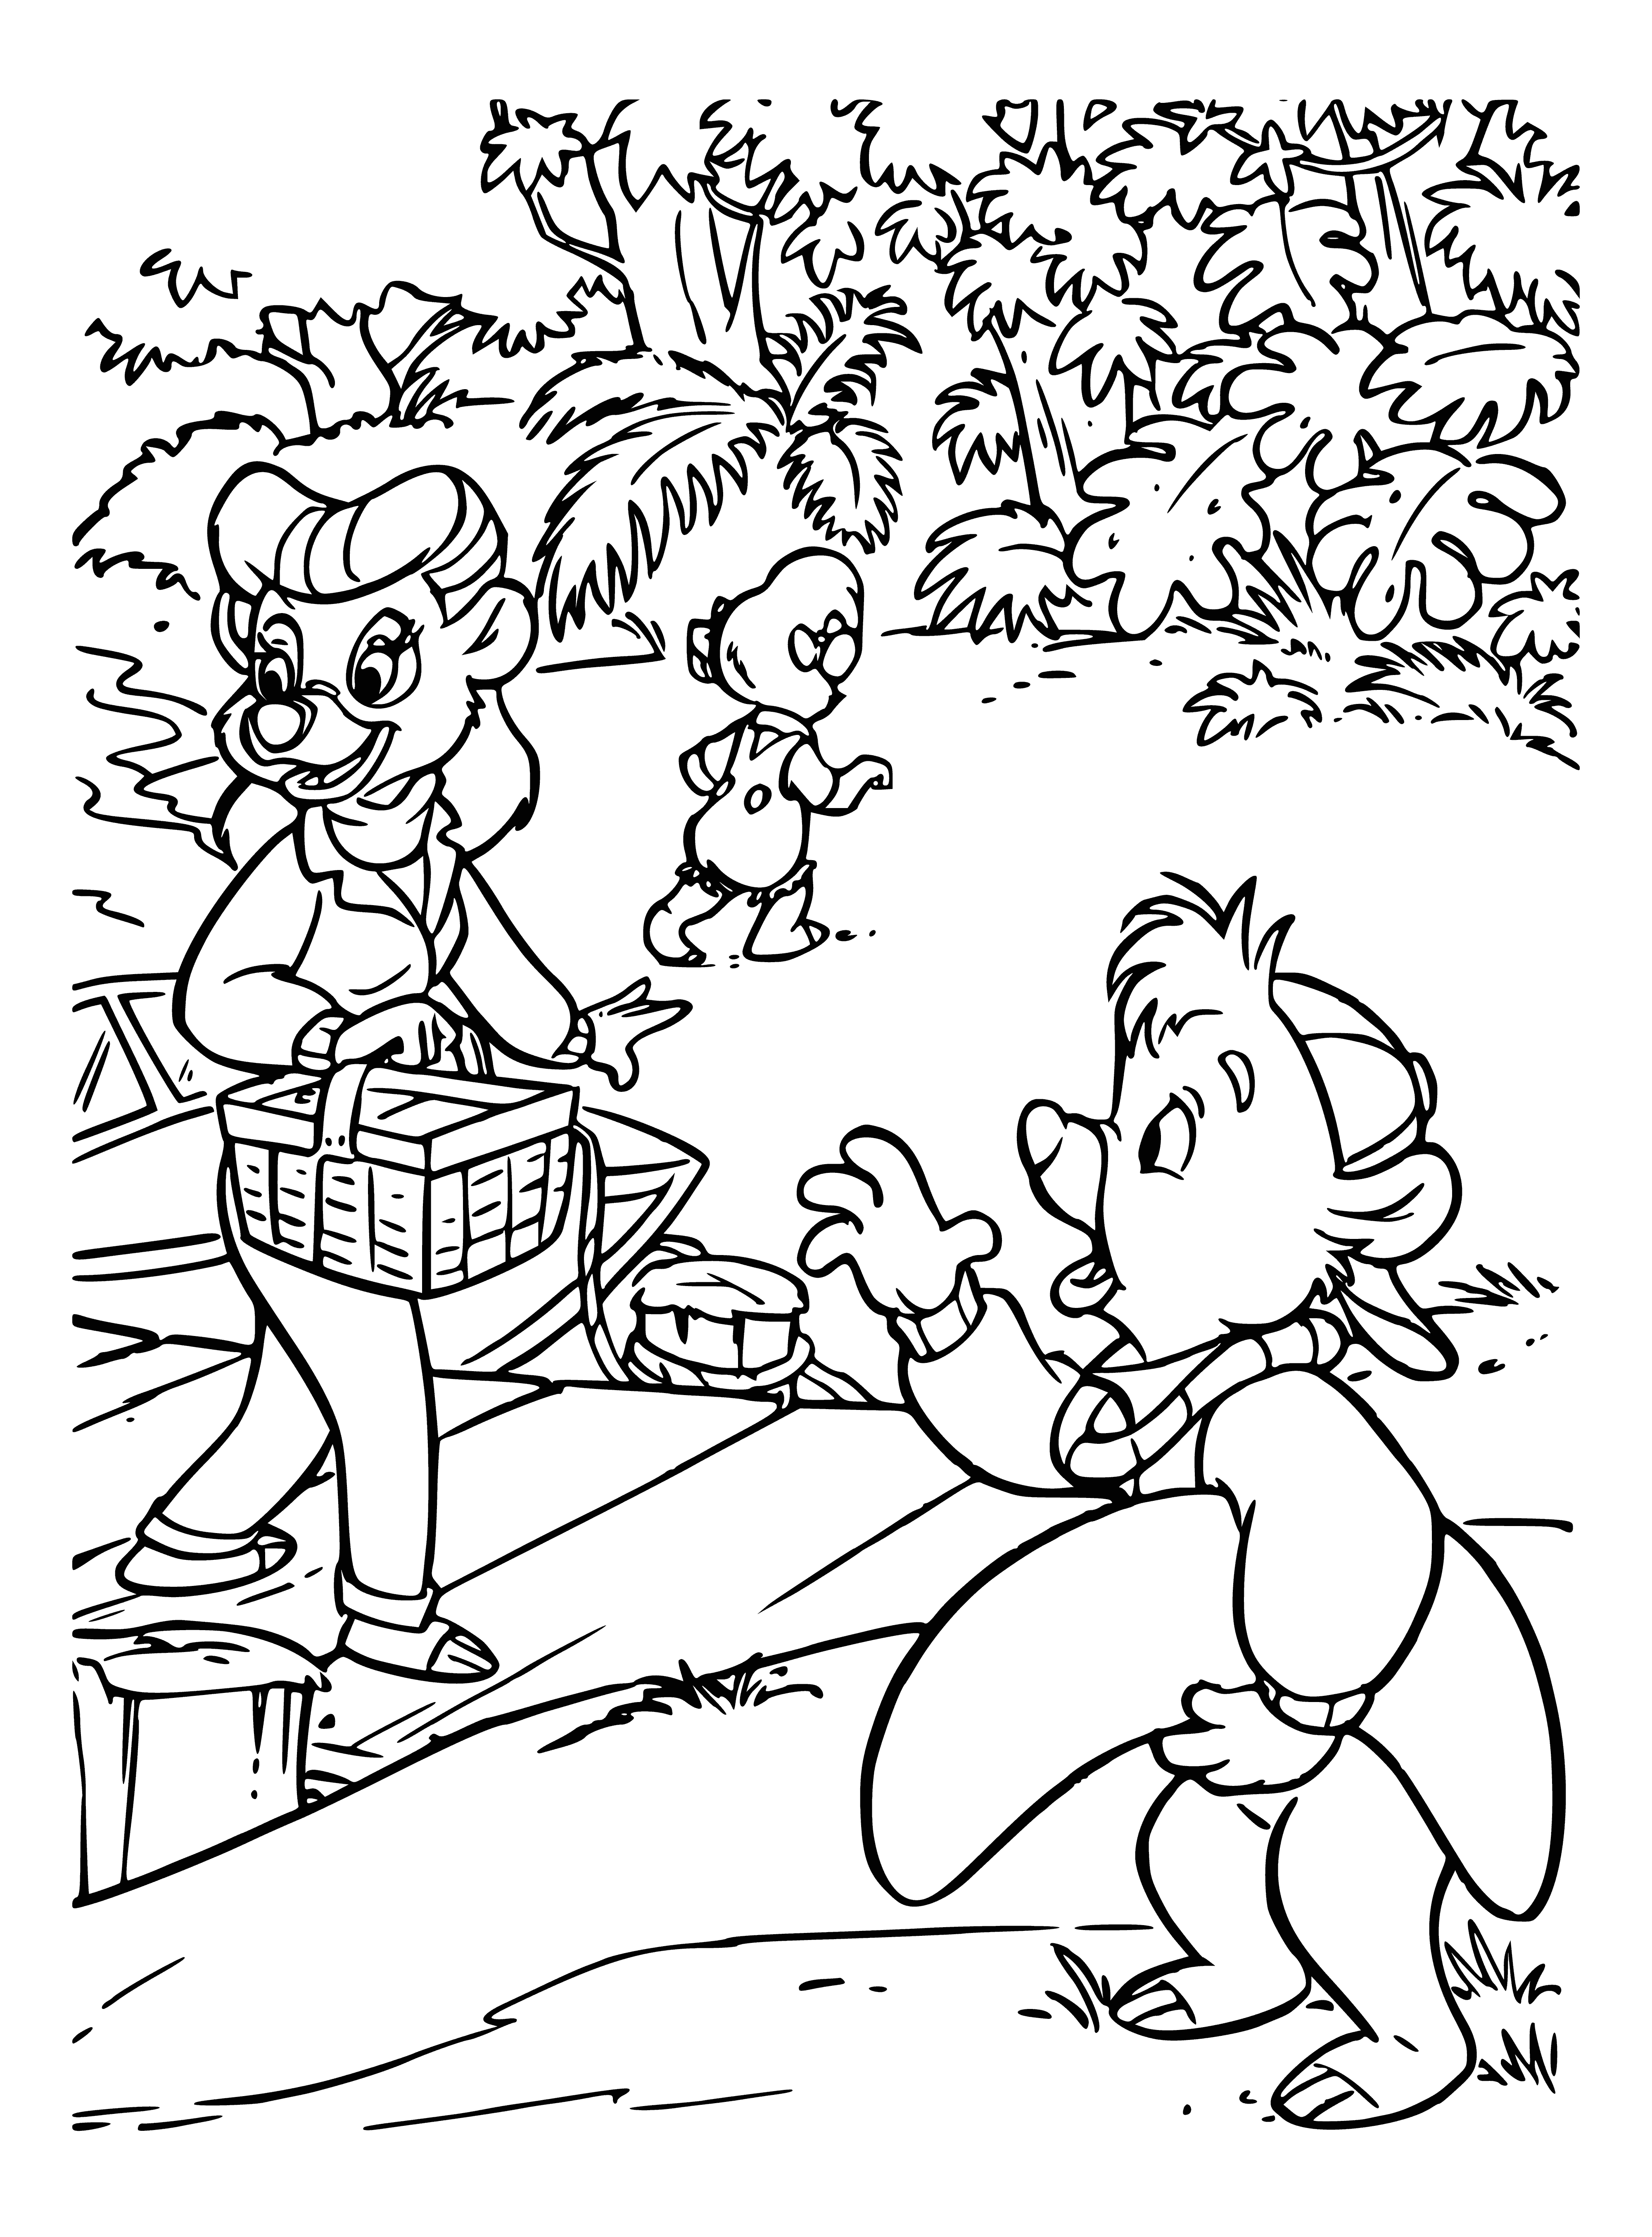 coloring page: Friends take turns telling stories about past wearers of clothes in the center of their circle.